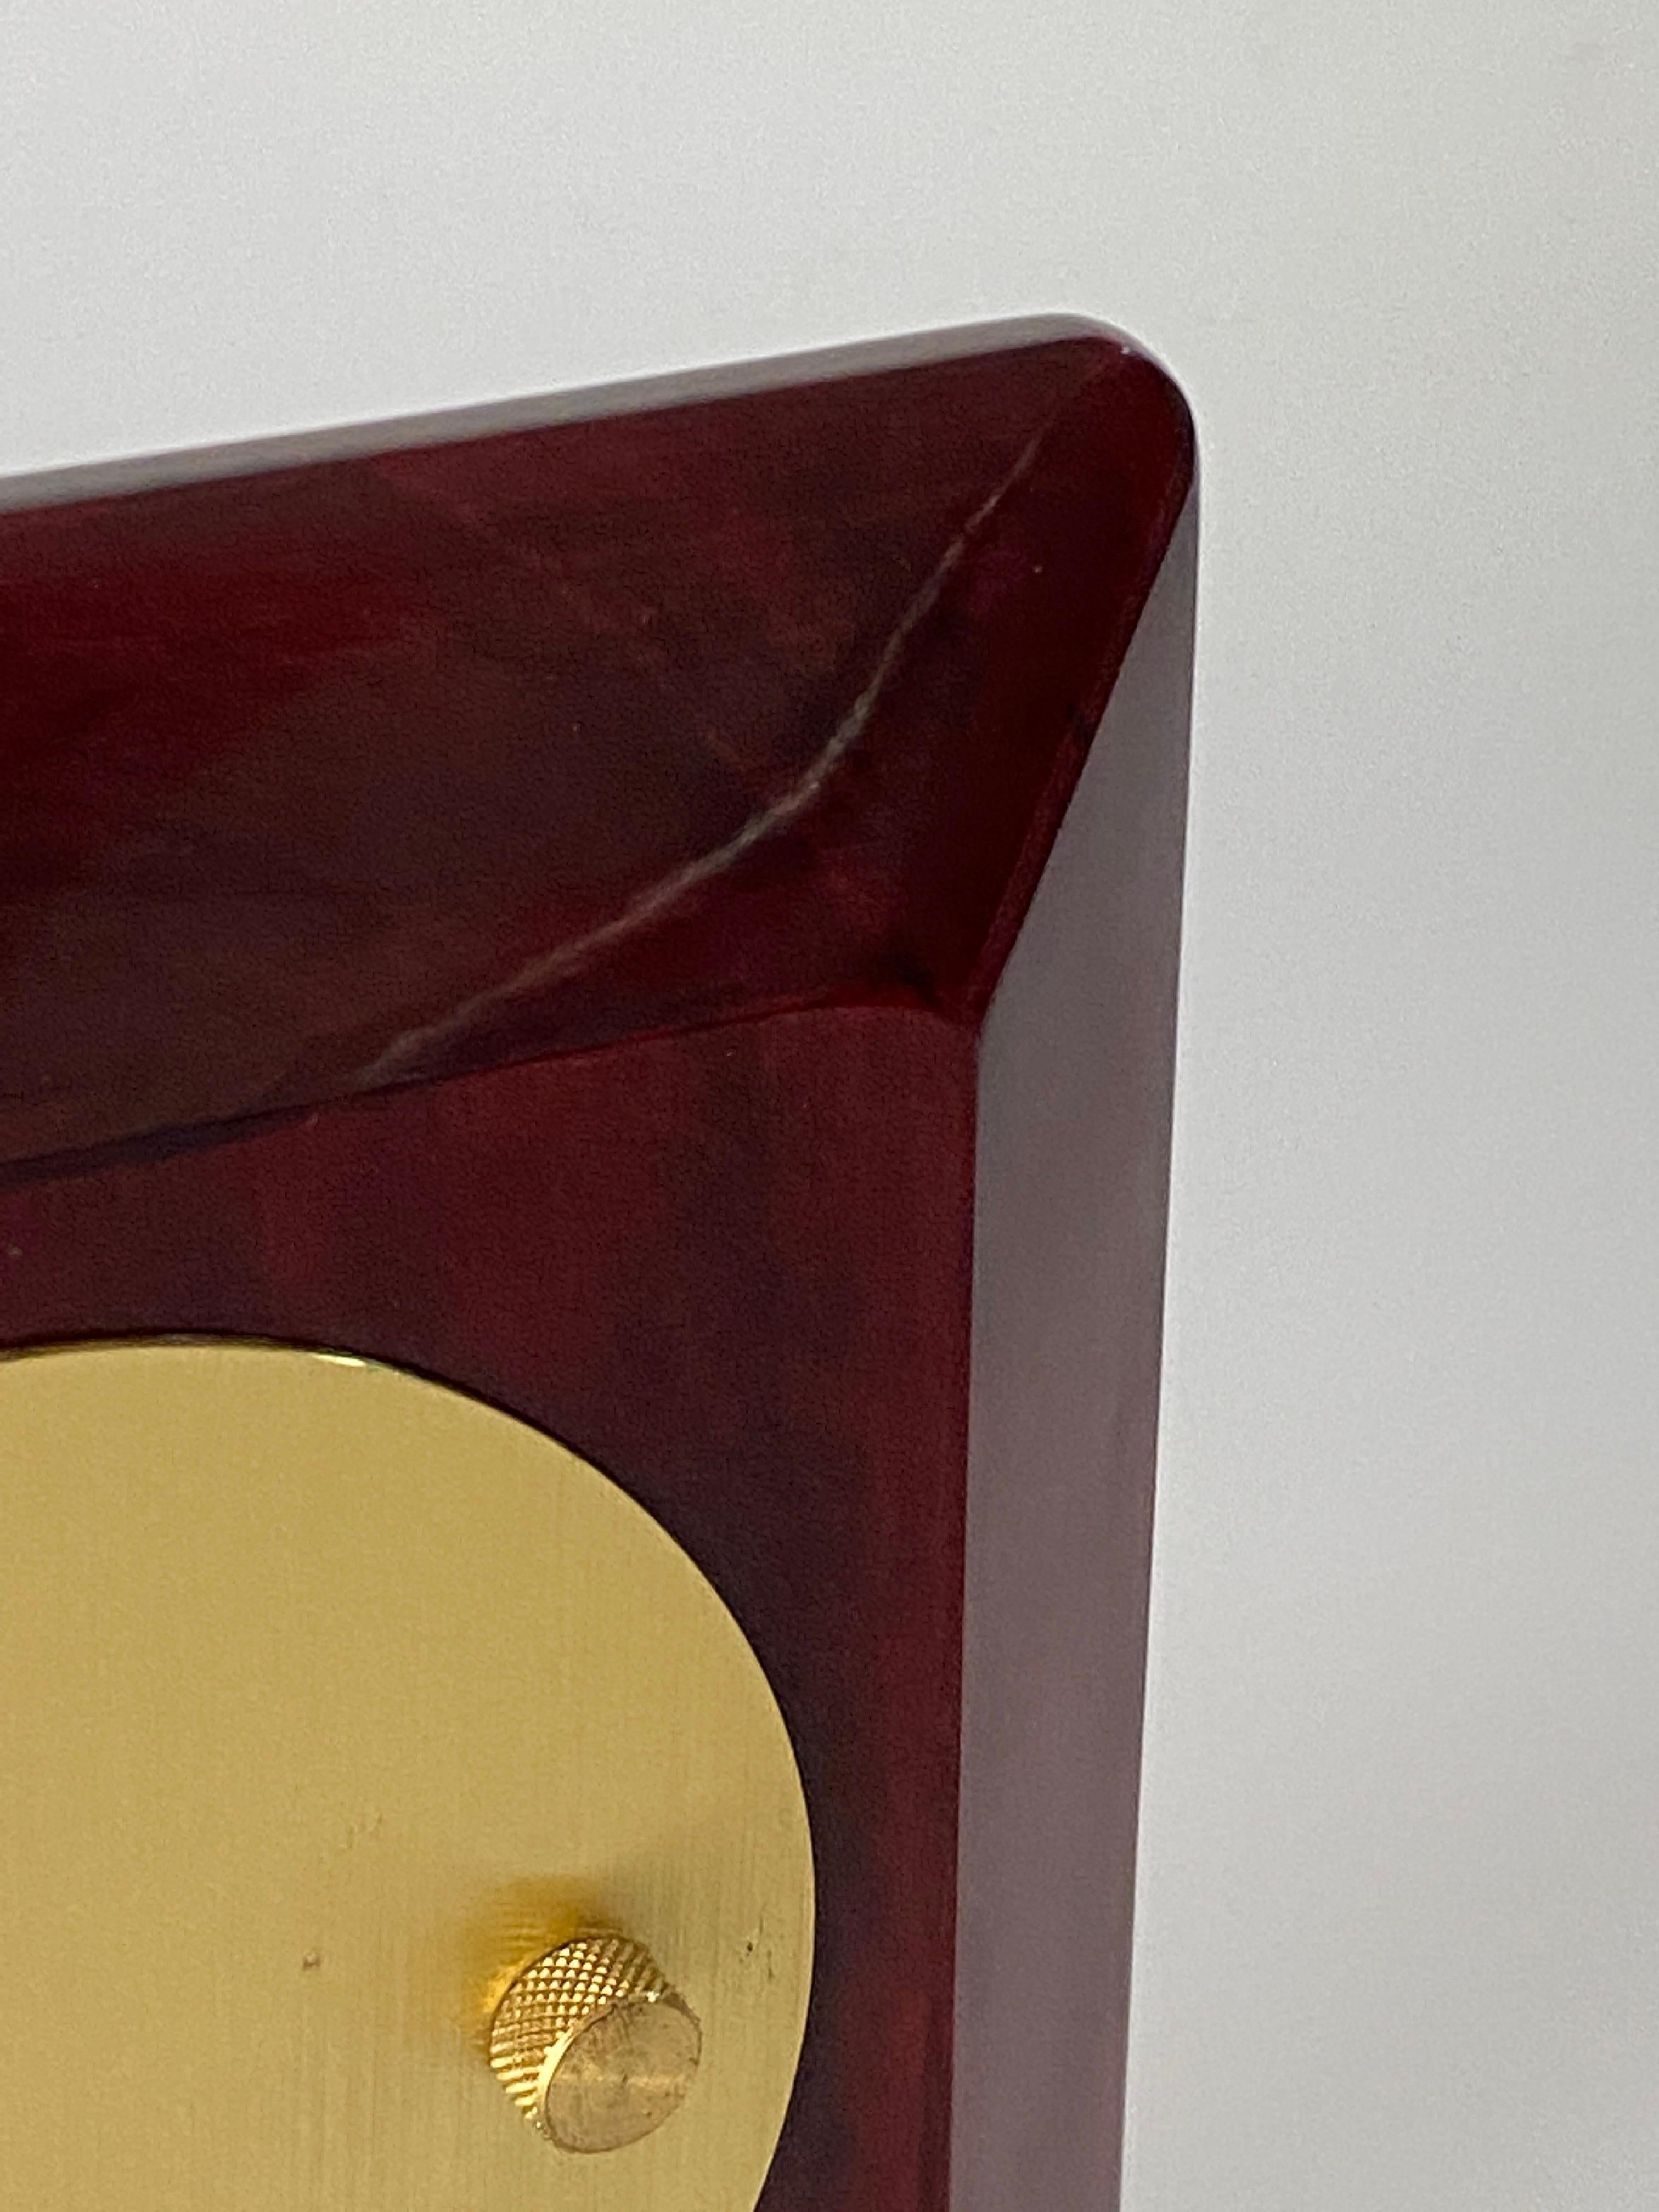 This clock is an table or desk clock. It has been made in Plastic, brass and glass, and it is heavy. It is a product from France circa 1970. The color is Burgundy.